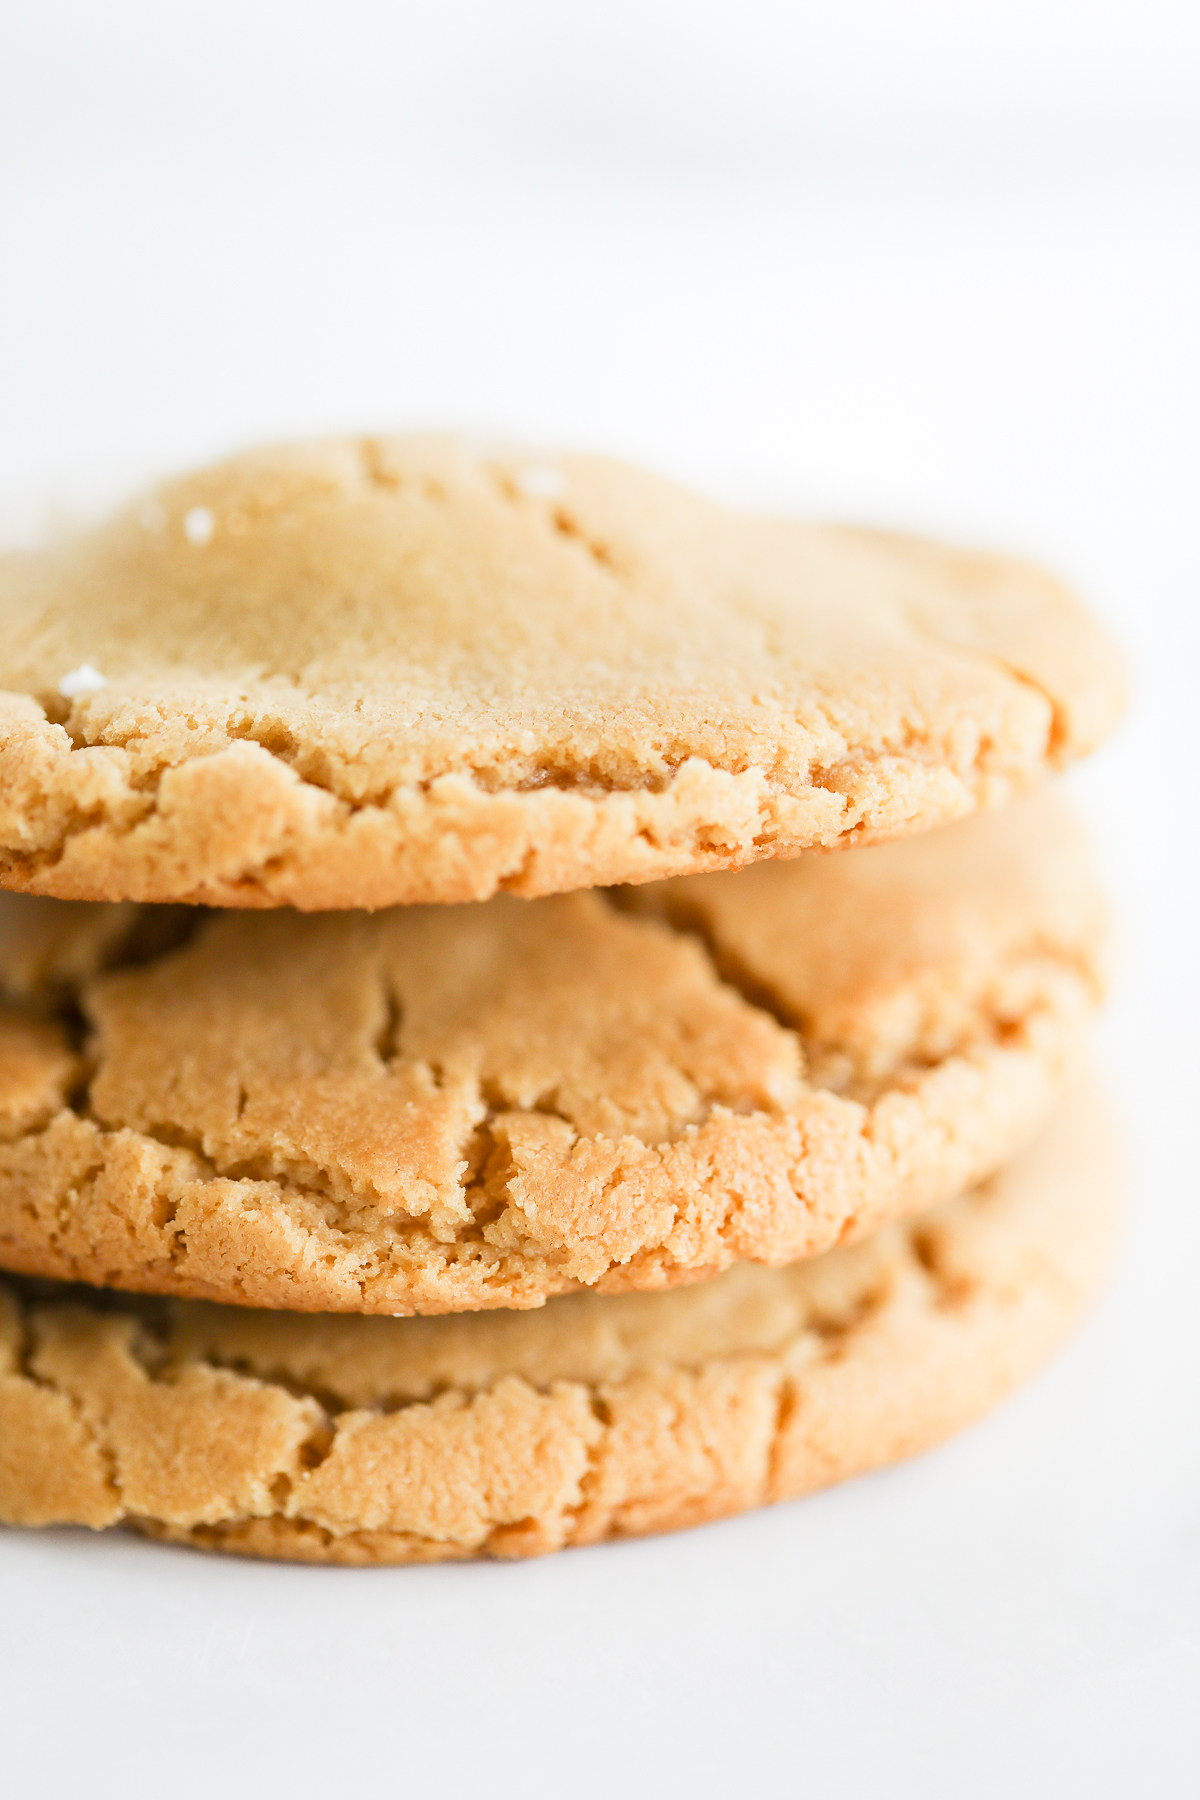 A stack of stuffed peanut butter cookies on a white surface.